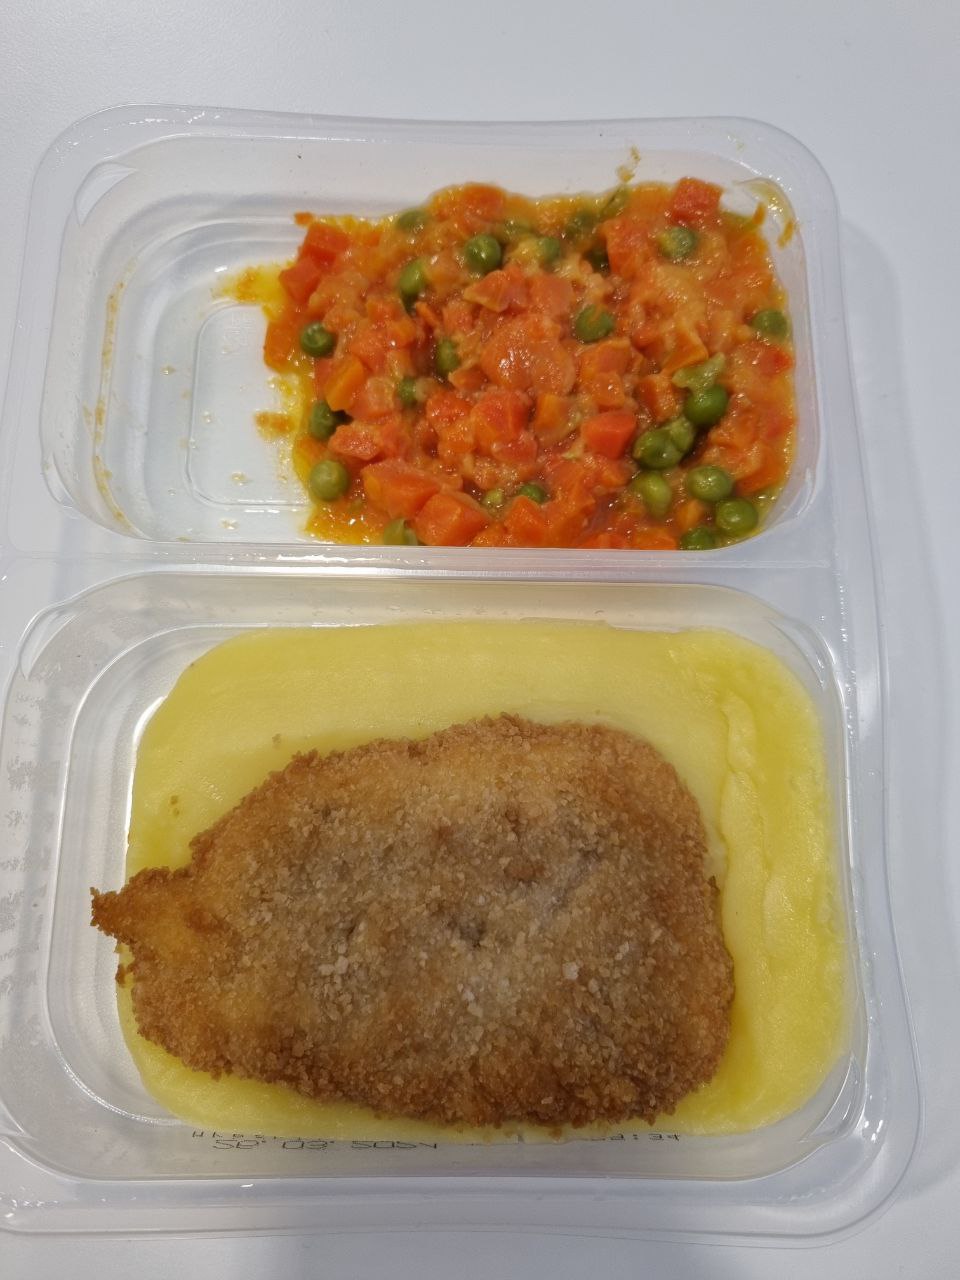 Mixed Meal With Breaded Meat Cutlet, Mashed Potatoes, And Vegetable Mix